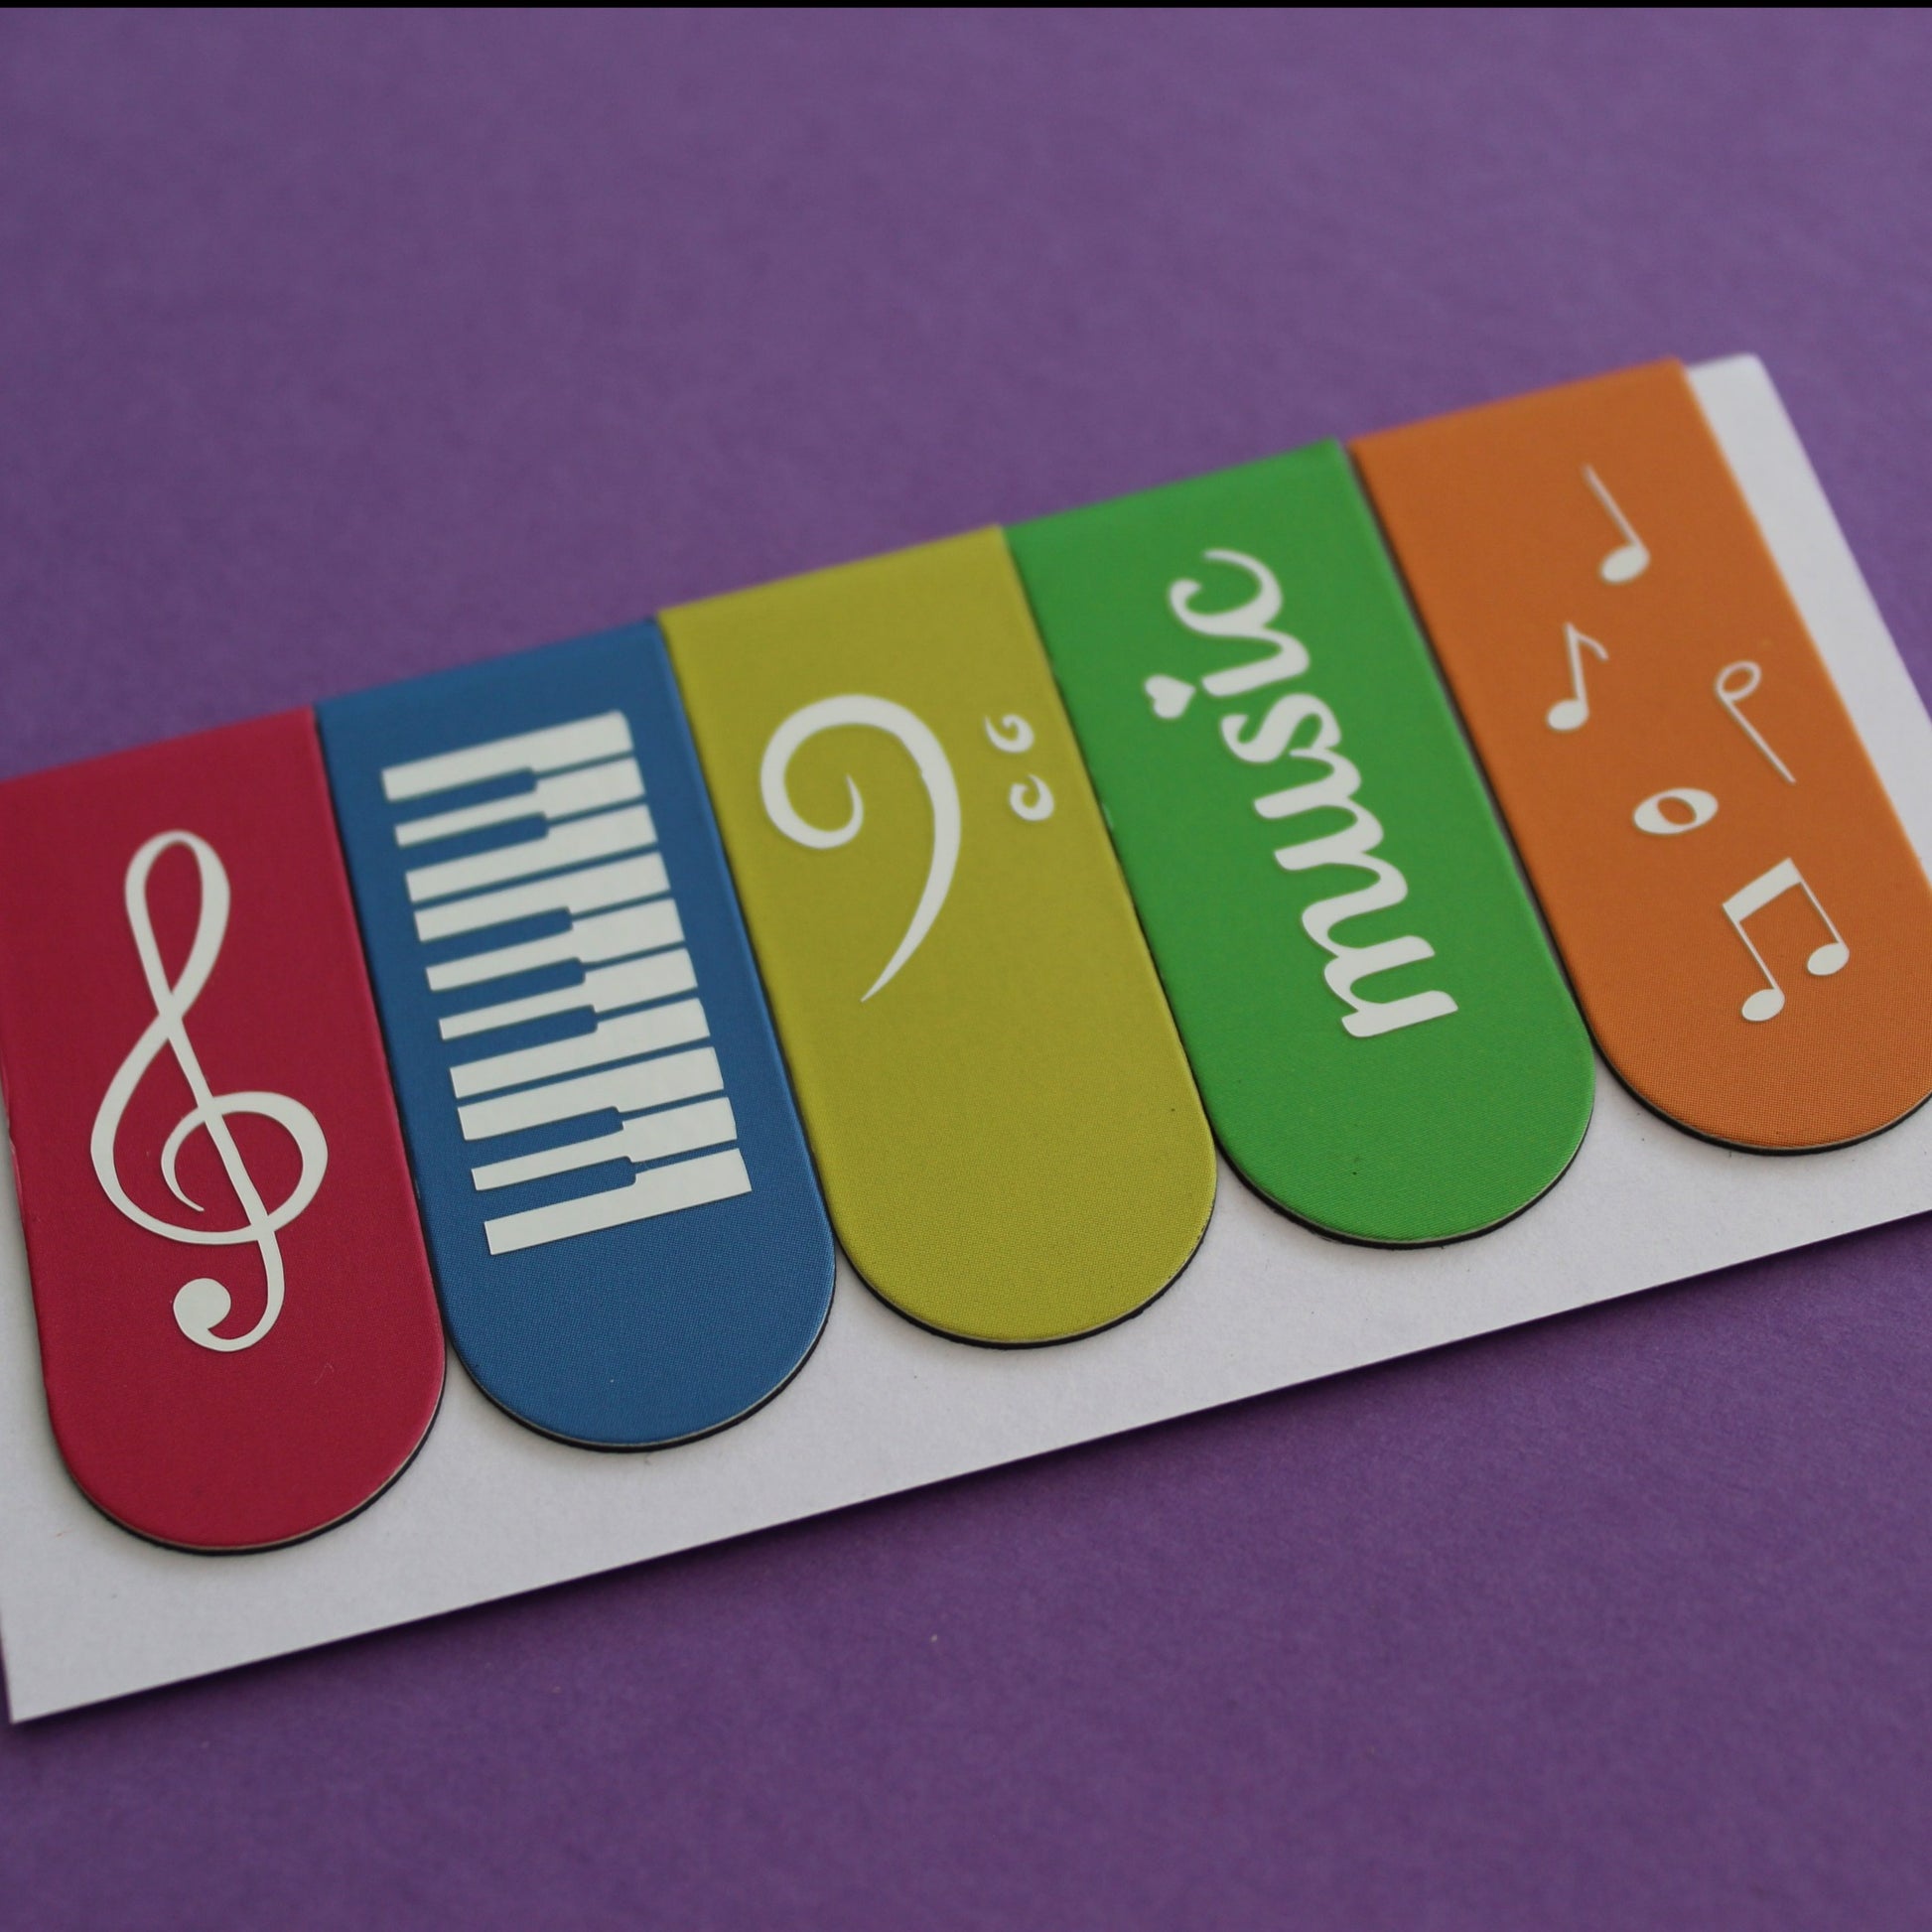 Bookmarks in pink, blue, yellow, green and orange. Each bookmark has a different symbol; treble clef, piano keys, bass clef, 'music' and music notes.